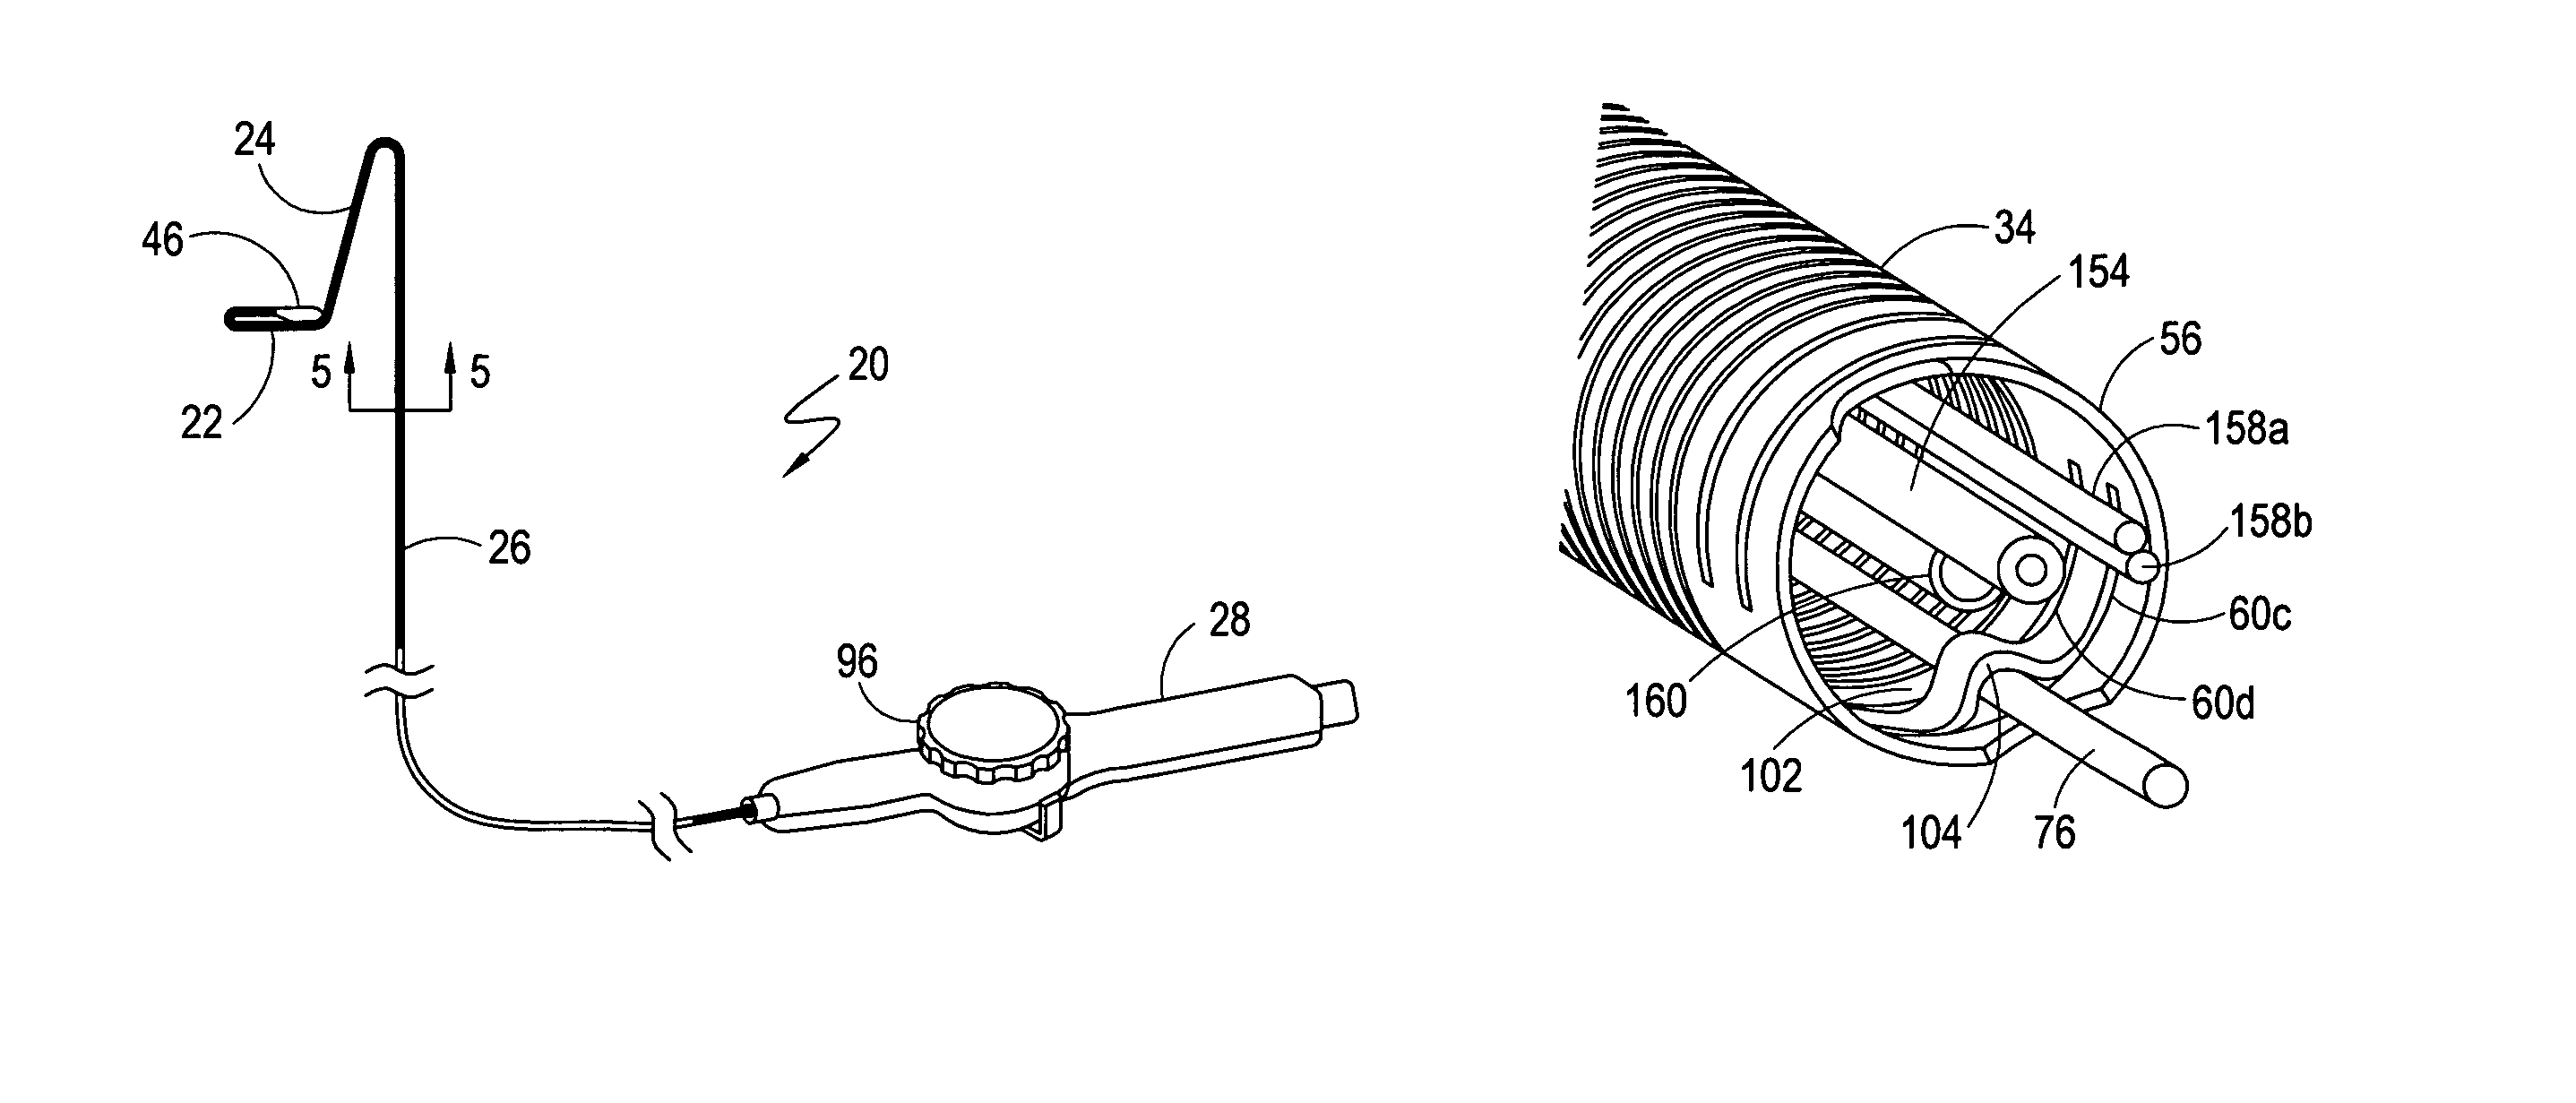 System for bi-directionally controlling the cryo-tip of a cryoablation catheter